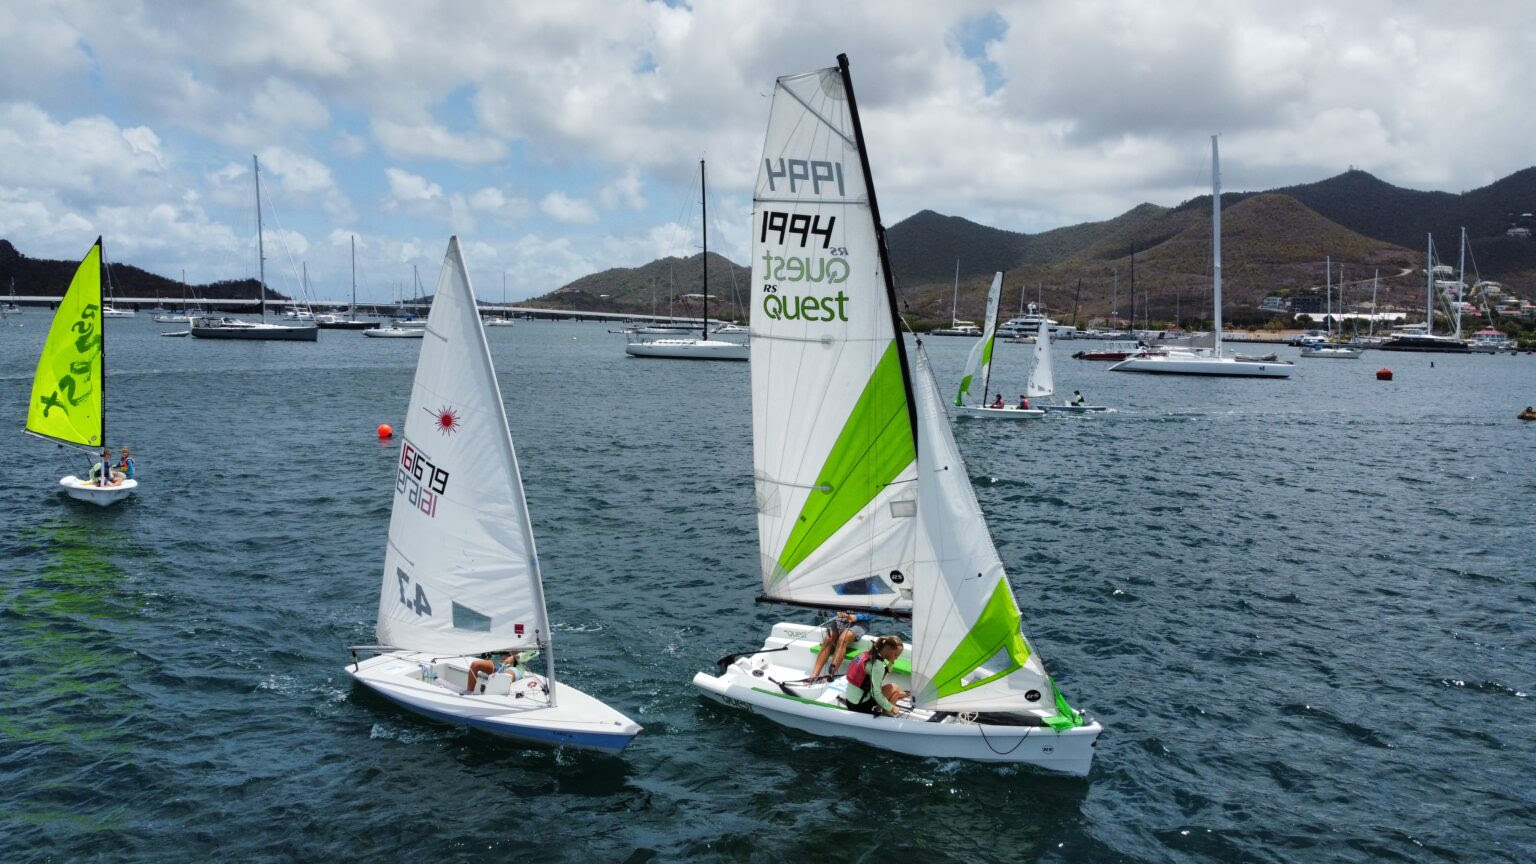 Sailing competition, Sint Maarten Yacht Club, youth sailing